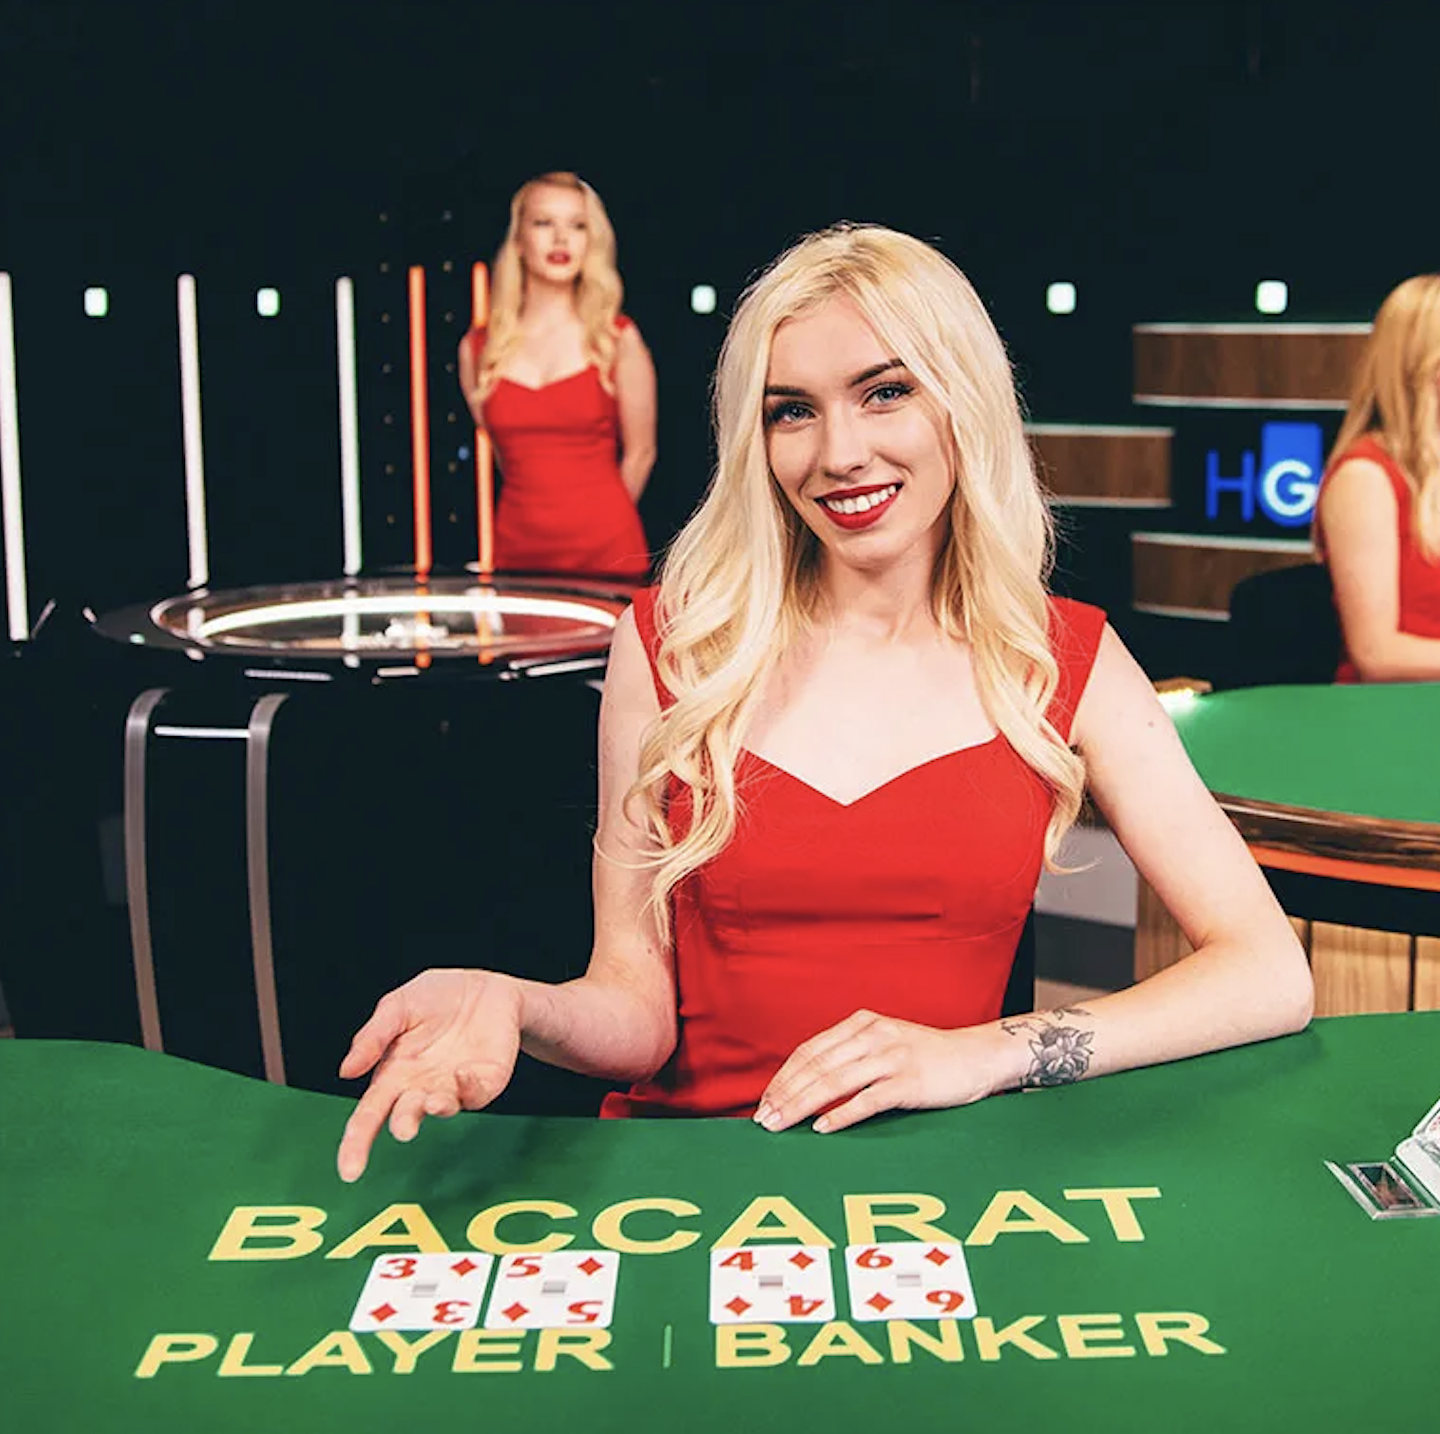 Baccarat is a Live Casino Game Provided by the Vendor Partner HOGaming GamingSoft